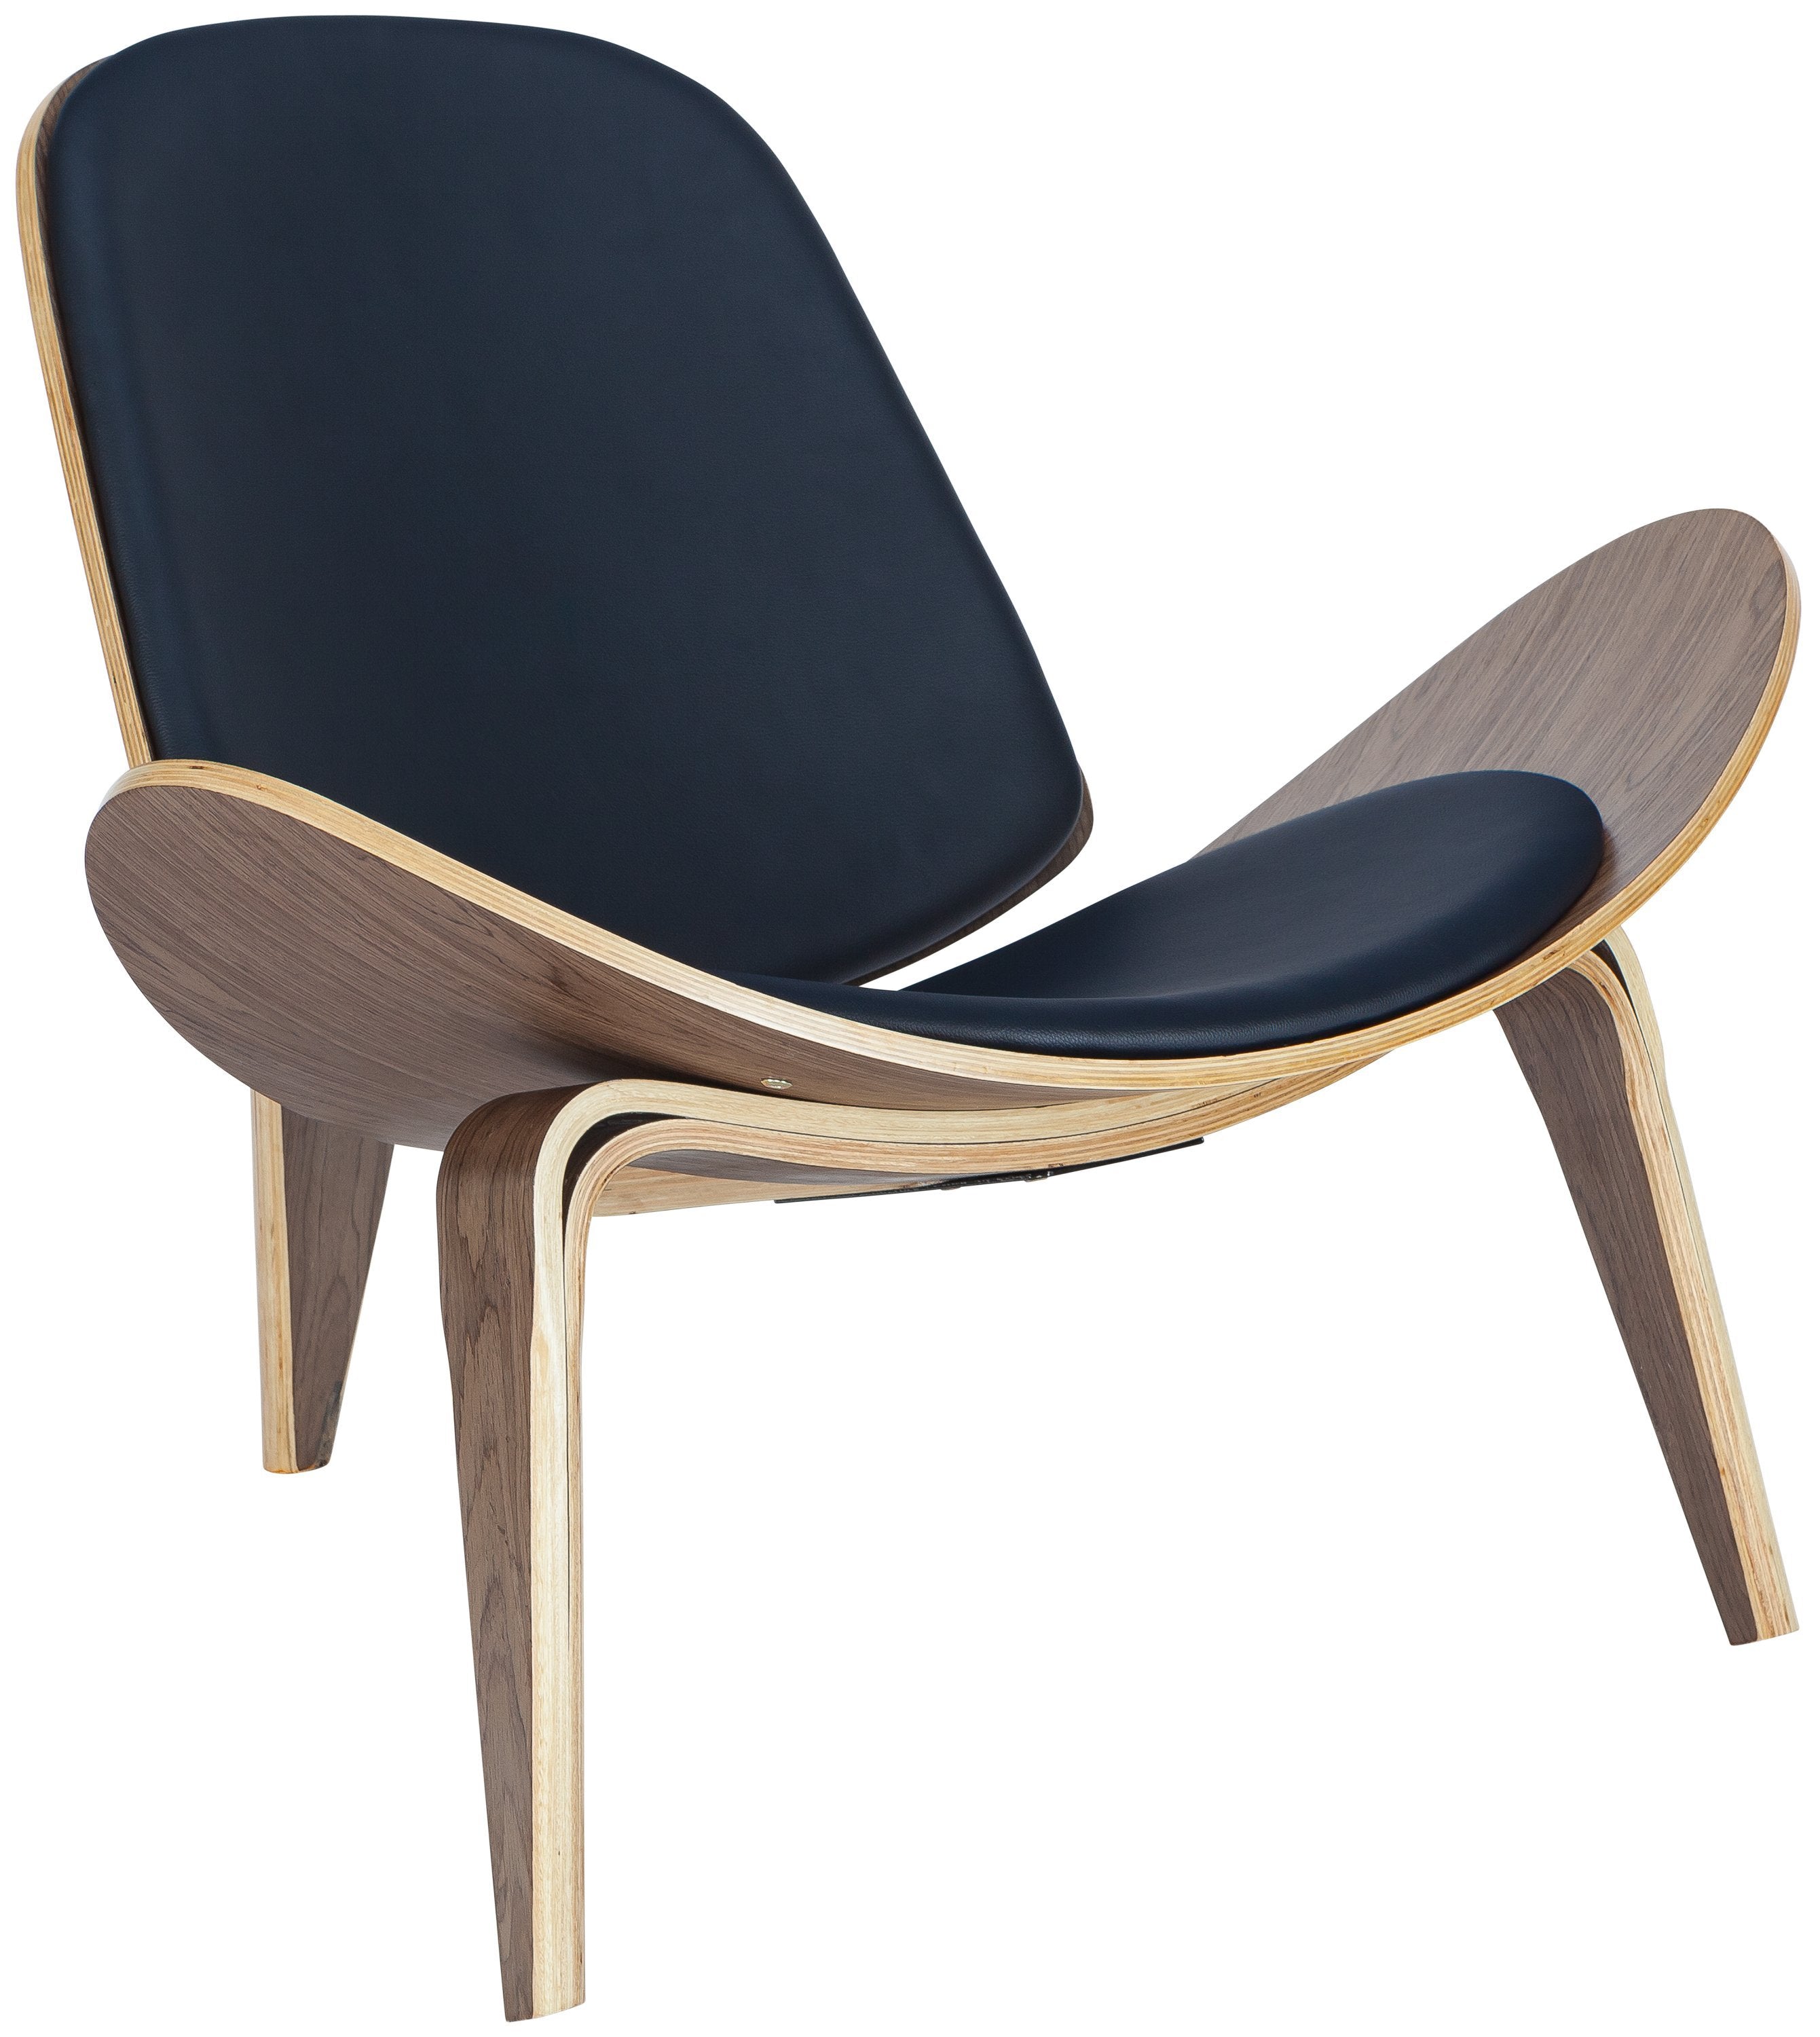 Buy Curved Plywood Lounge Chair at Lifeix Design for only $418.00